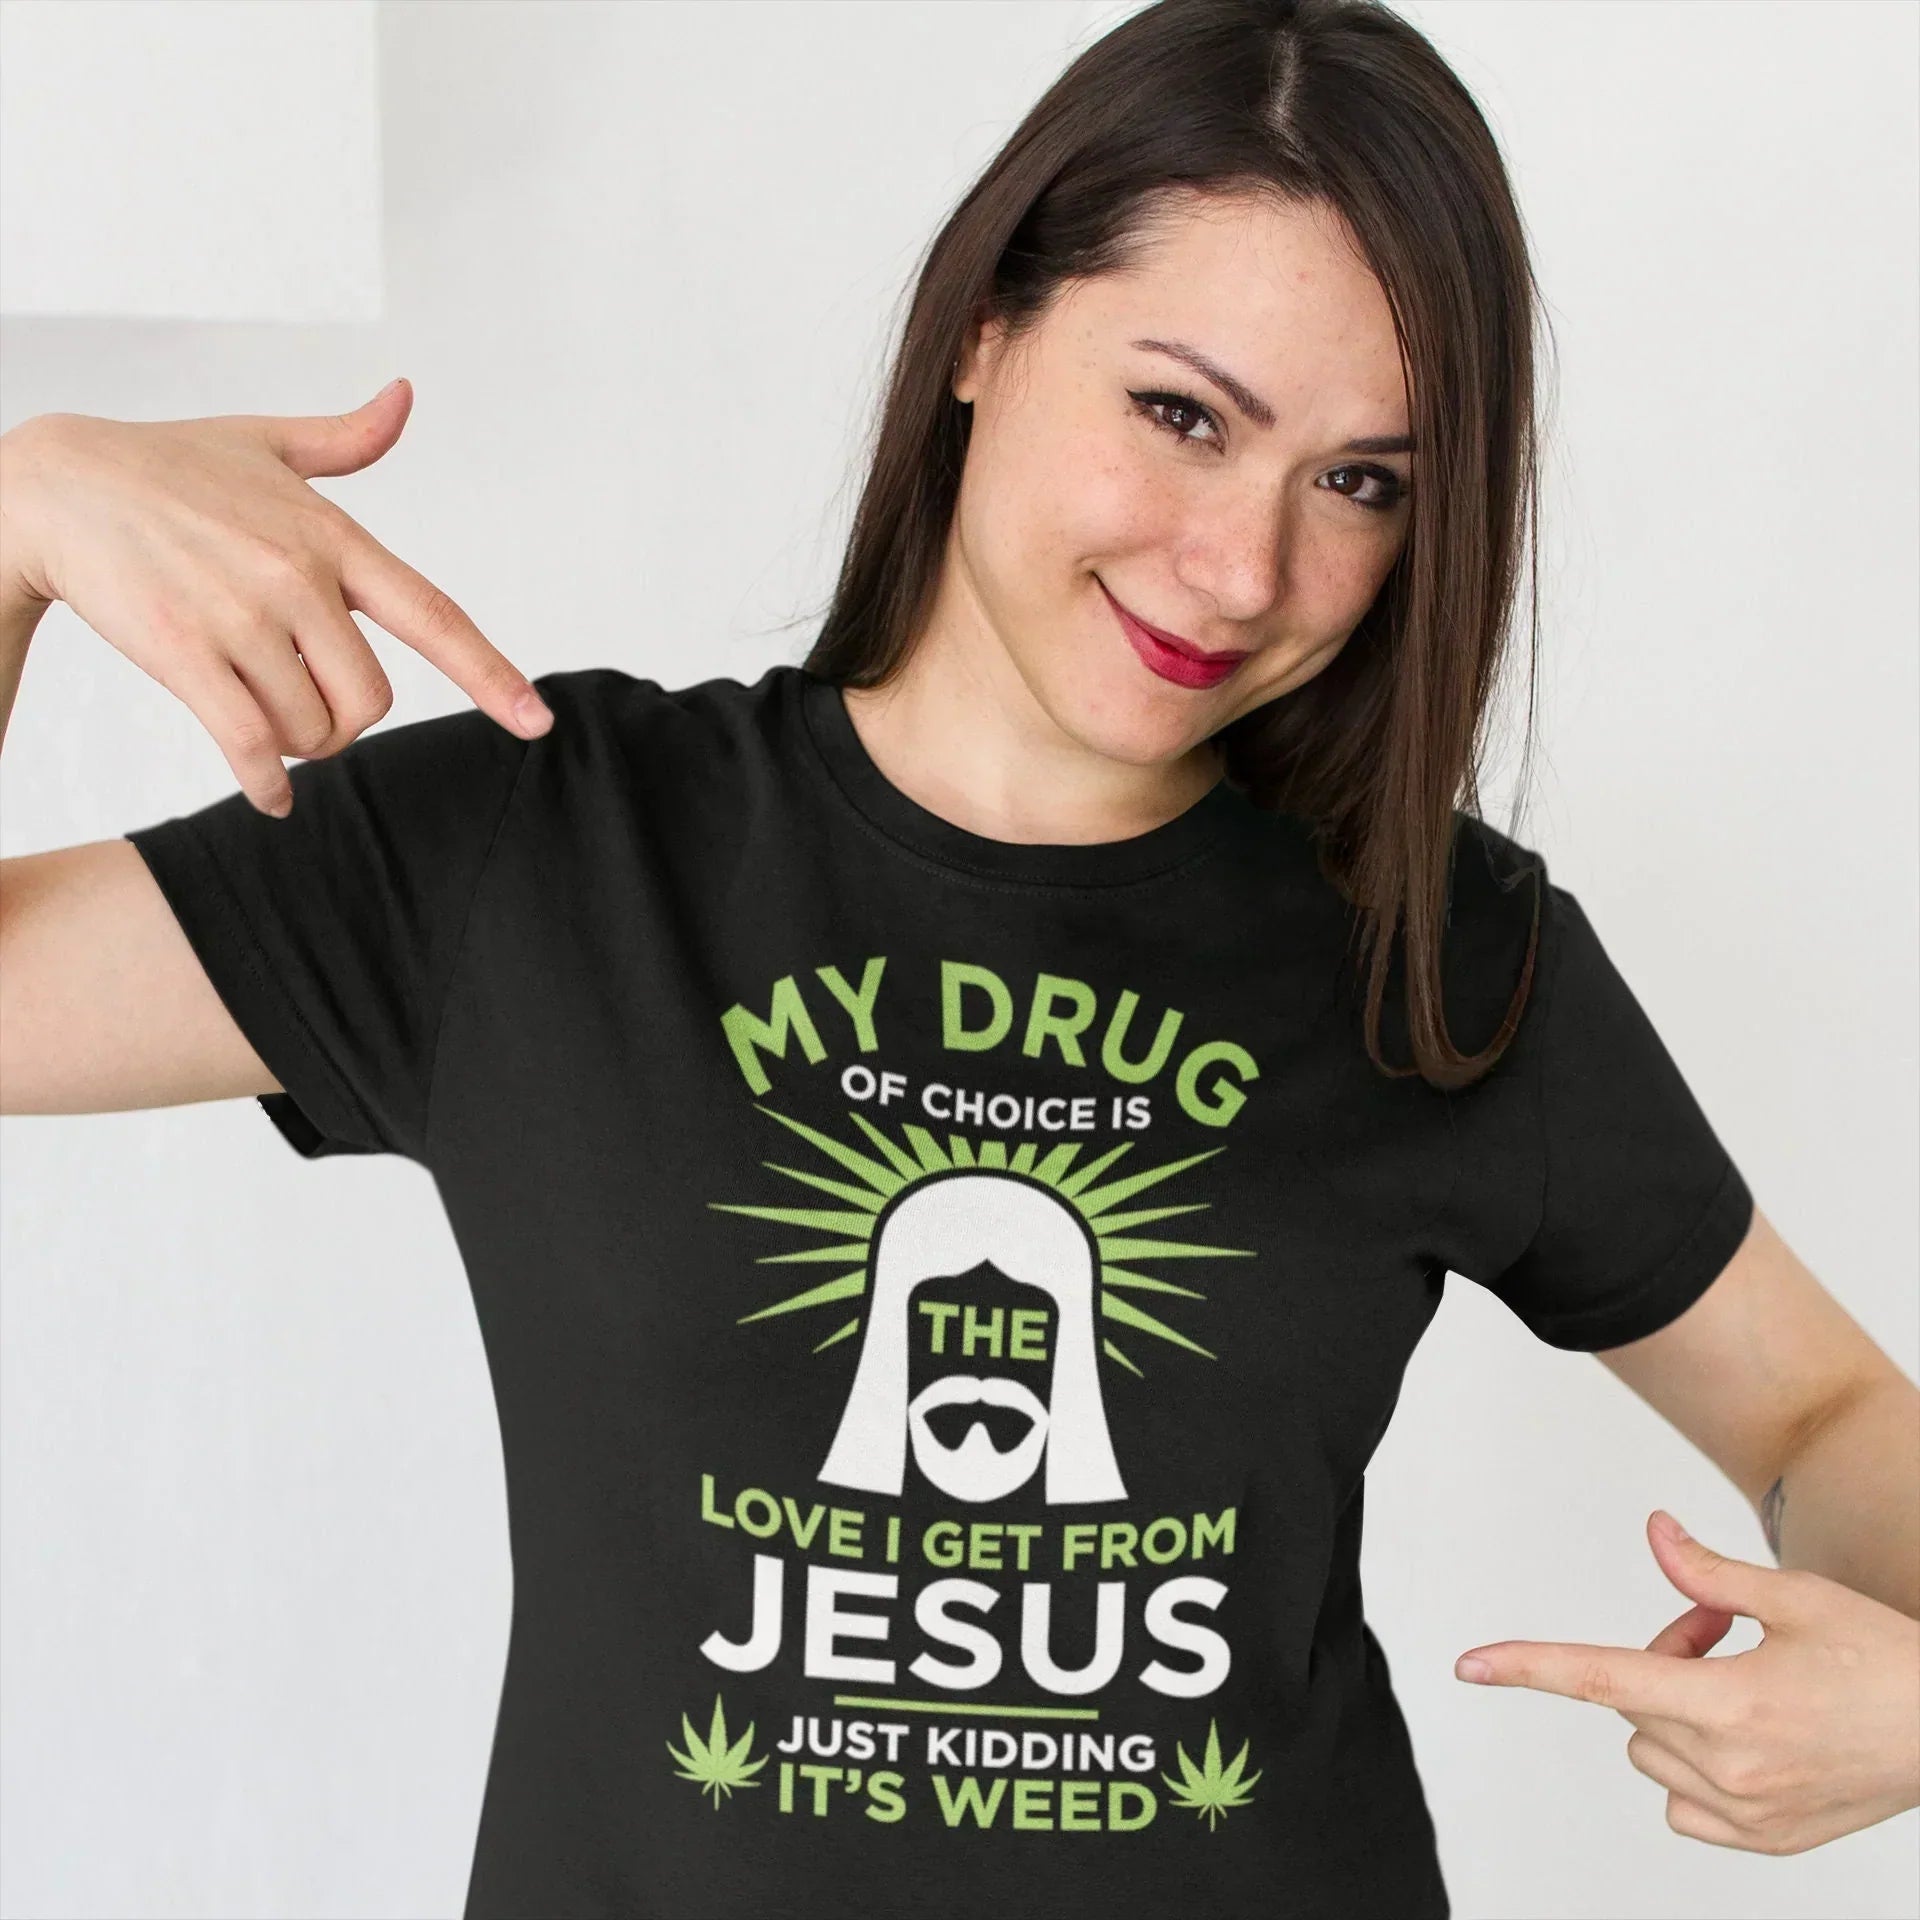 My Drug of Choice is the Love I Get From Jesus! Just Kidding IT Weed! 😁